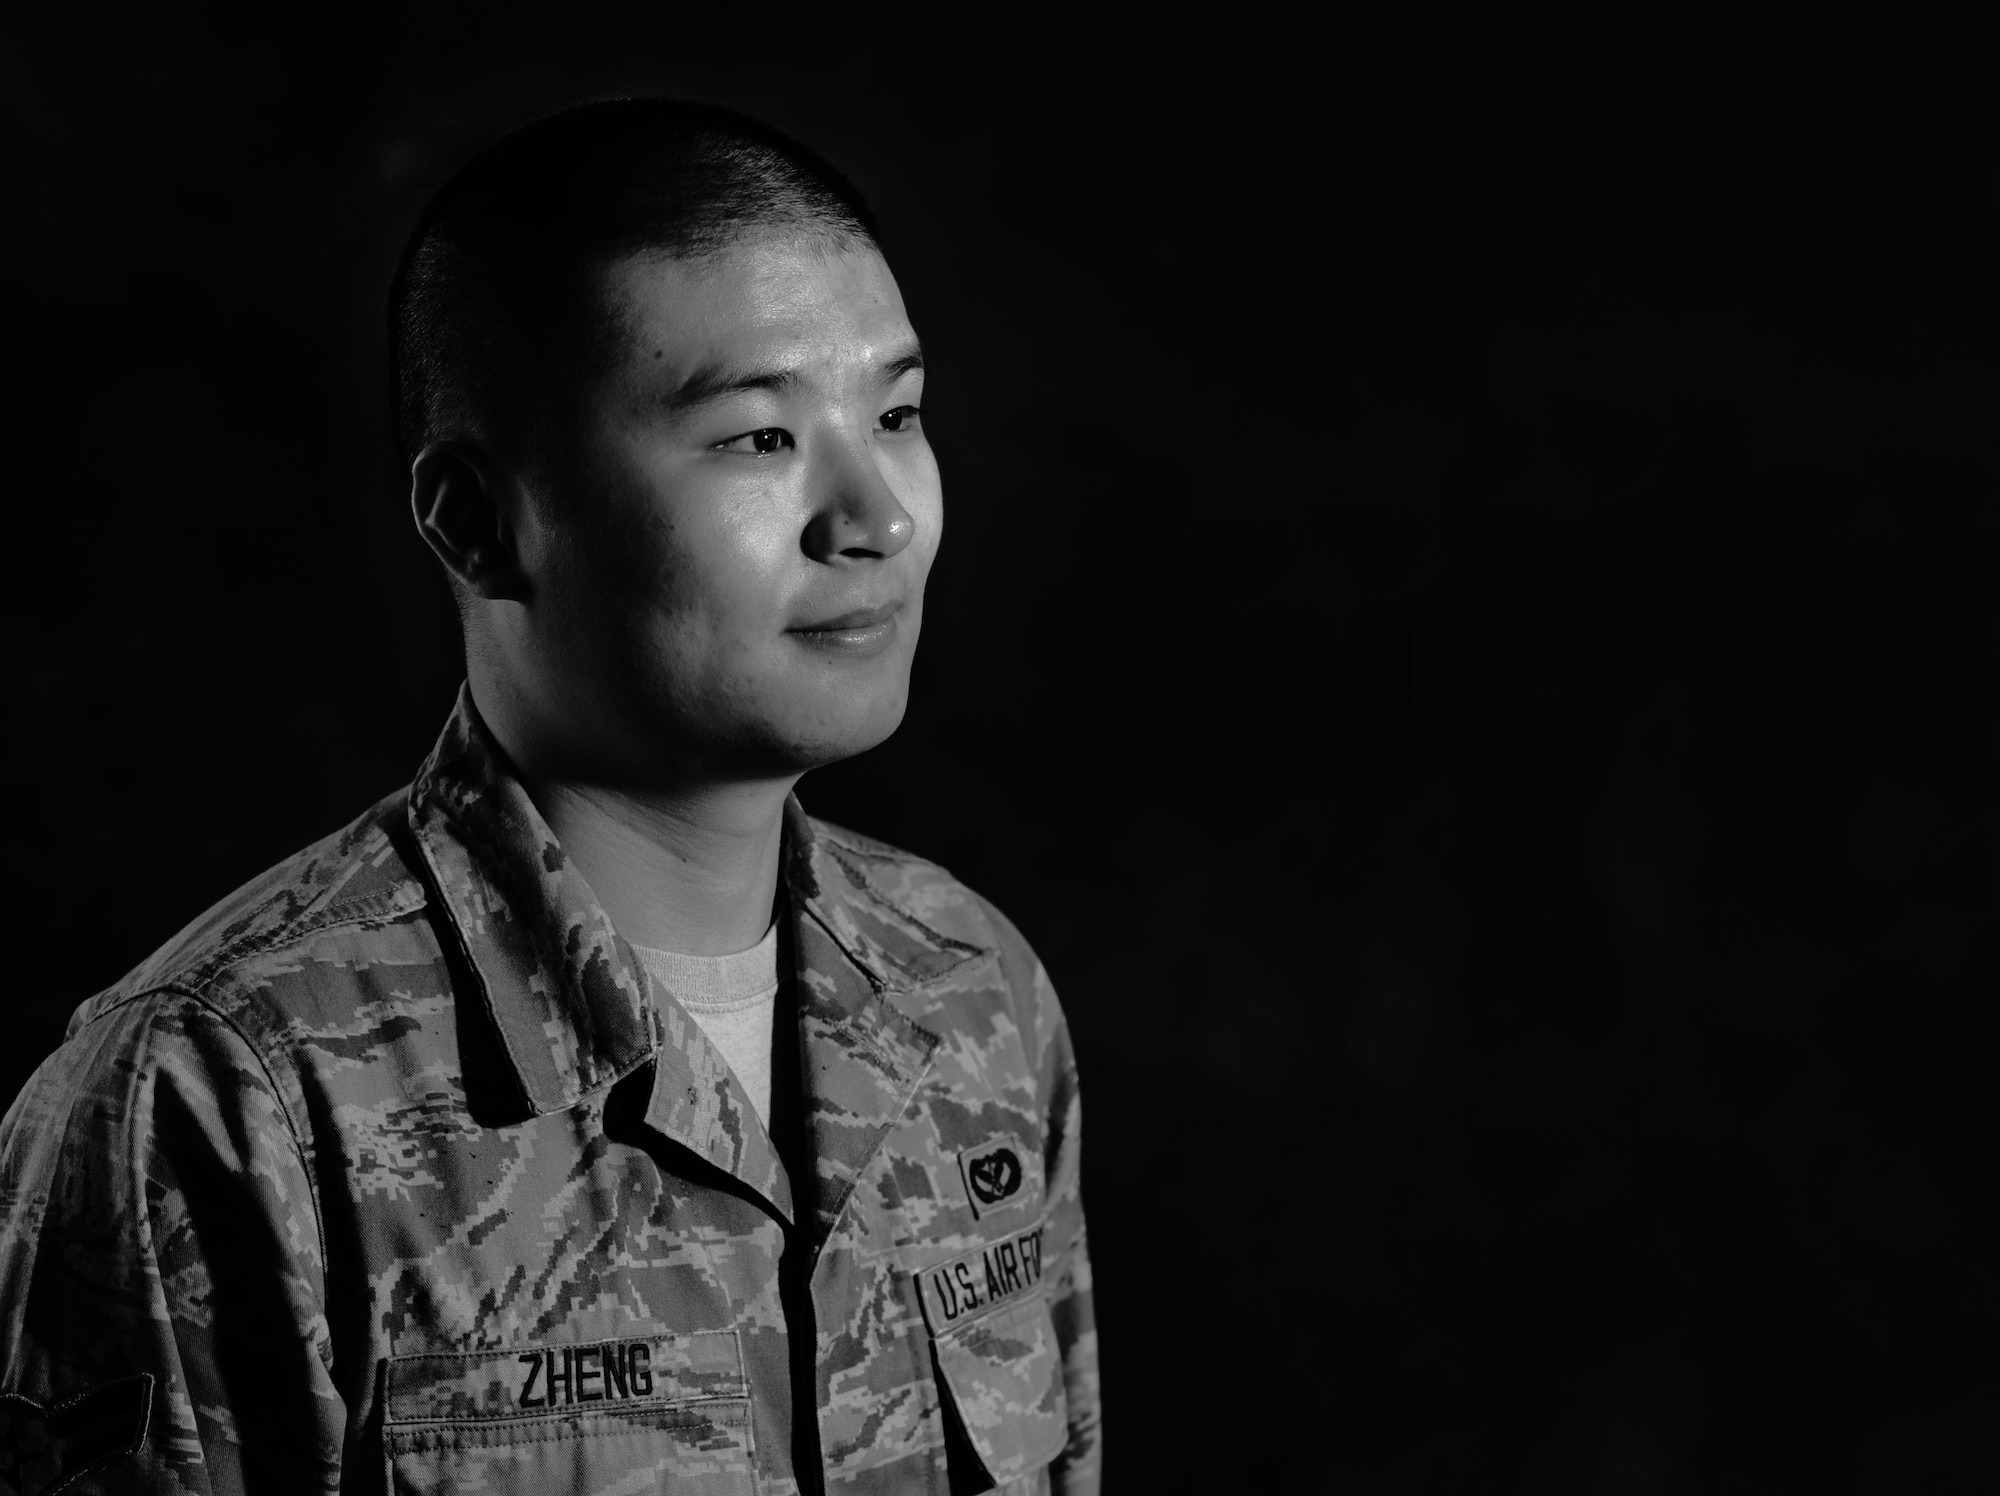 Airman 1st Class Xing Zheng traveled more than 7,964 miles from his hometown of Fuzhou, China, to be an American citizen. After spending the first 20 years of his entire life in the capital of one of the largest cities in the Fujian province in China, Zheng, with his father and sister, left the life he knew and started a new chapter in New York City. Zheng is a 633rd Civil Engineering Squadron engineer technician at Langley Air Force Base, Va. (U.S. Air Force photo illustration/Airman 1st Class Victoria H. Taylor)